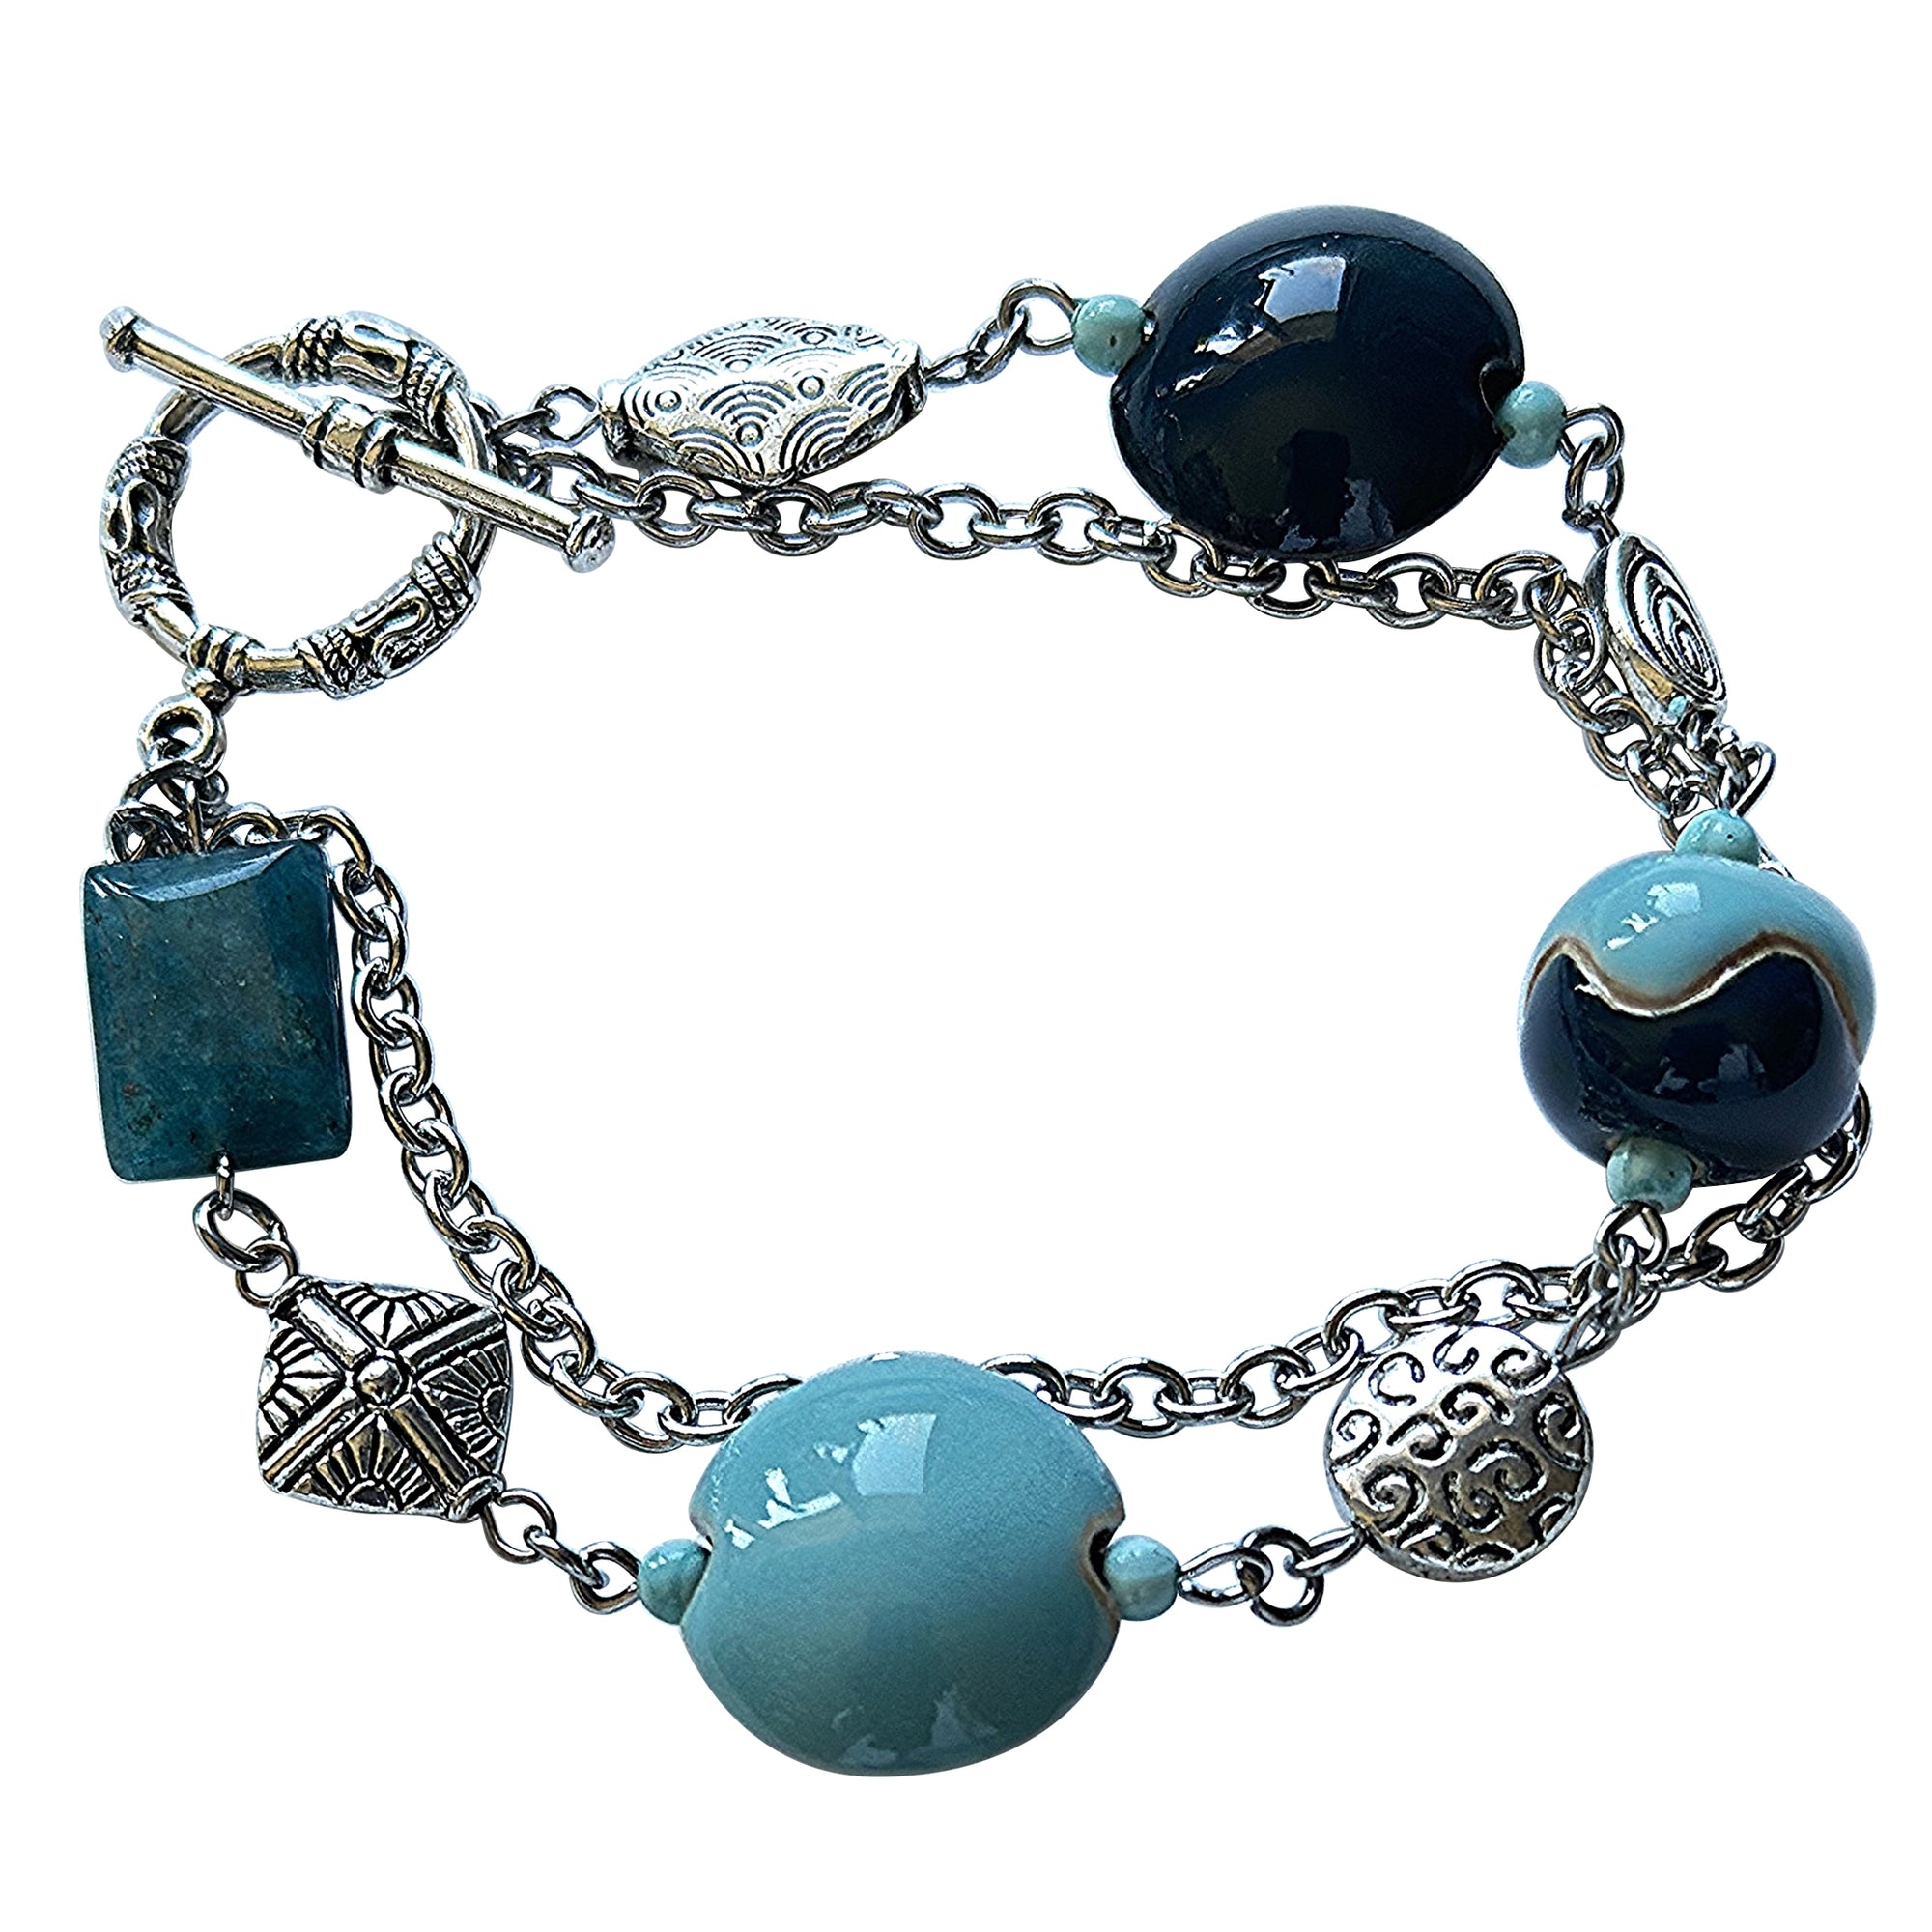 Teal and Aqua Golem Clay, Stone Bracelet with Stainless Steel Chain and Apatite Stone